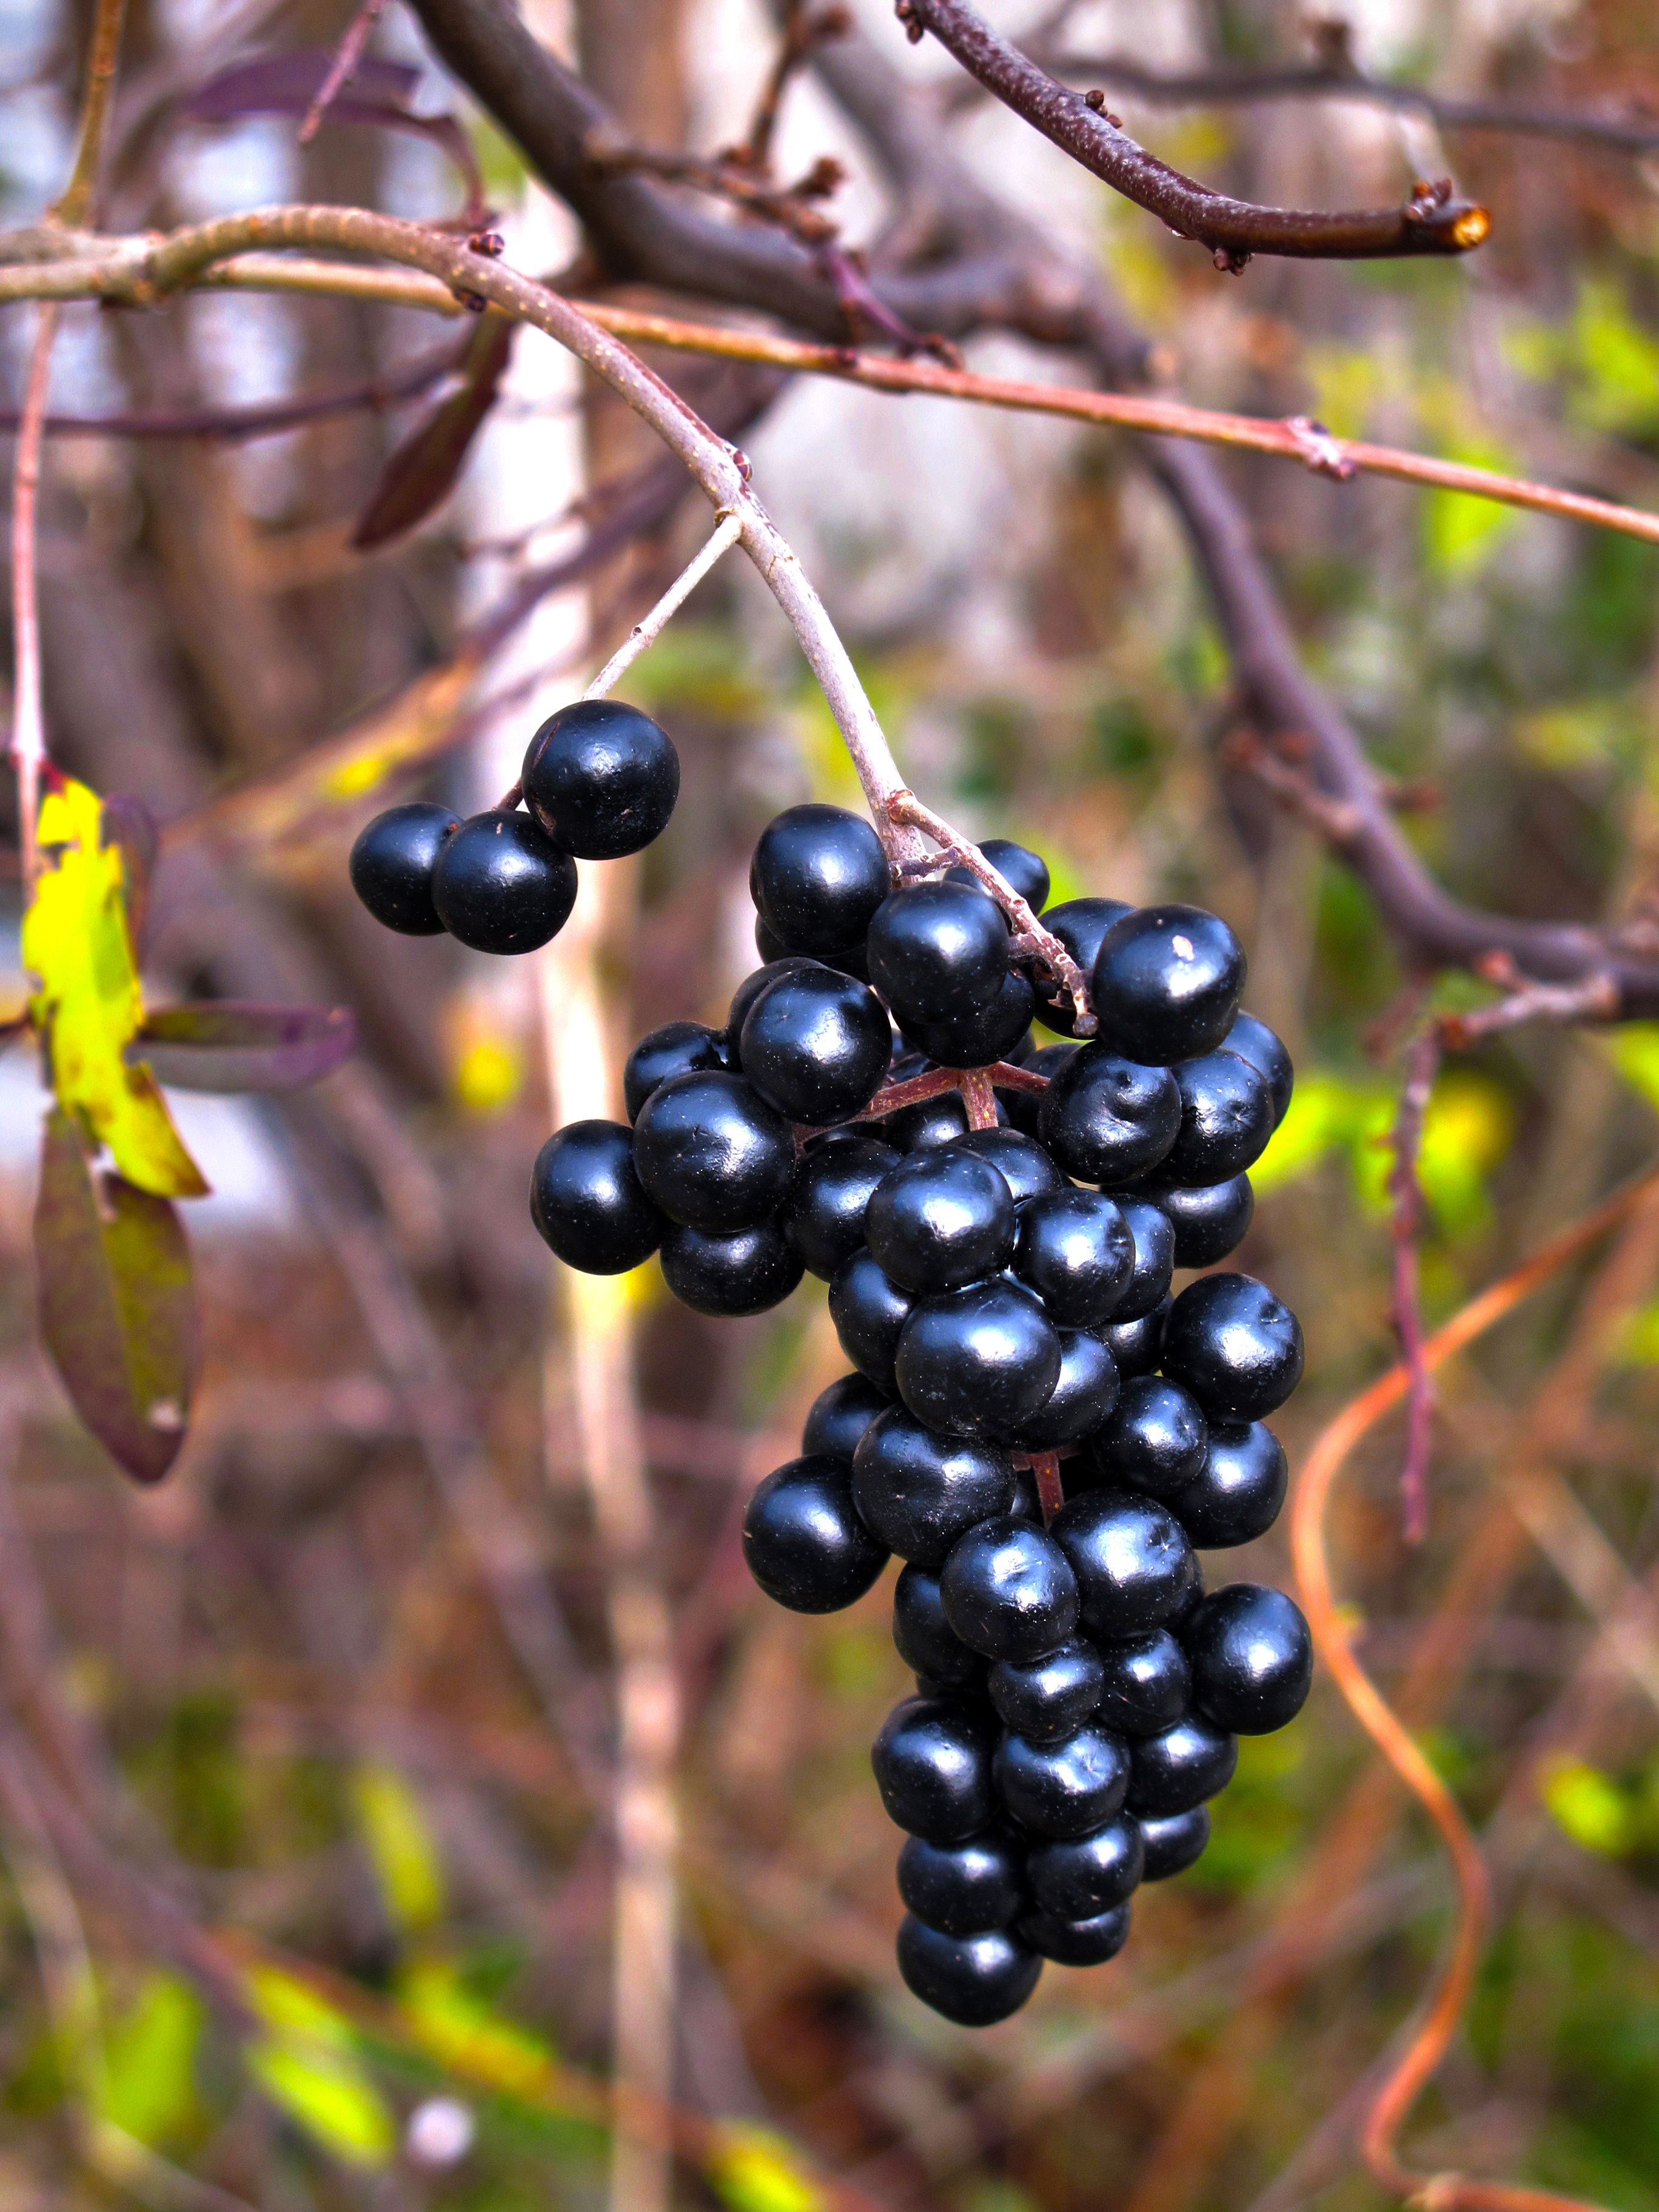 https://hips.hearstapps.com/hmg-prod/images/close-up-of-a-branch-of-european-elderberry-royalty-free-image-1690215453.jpg